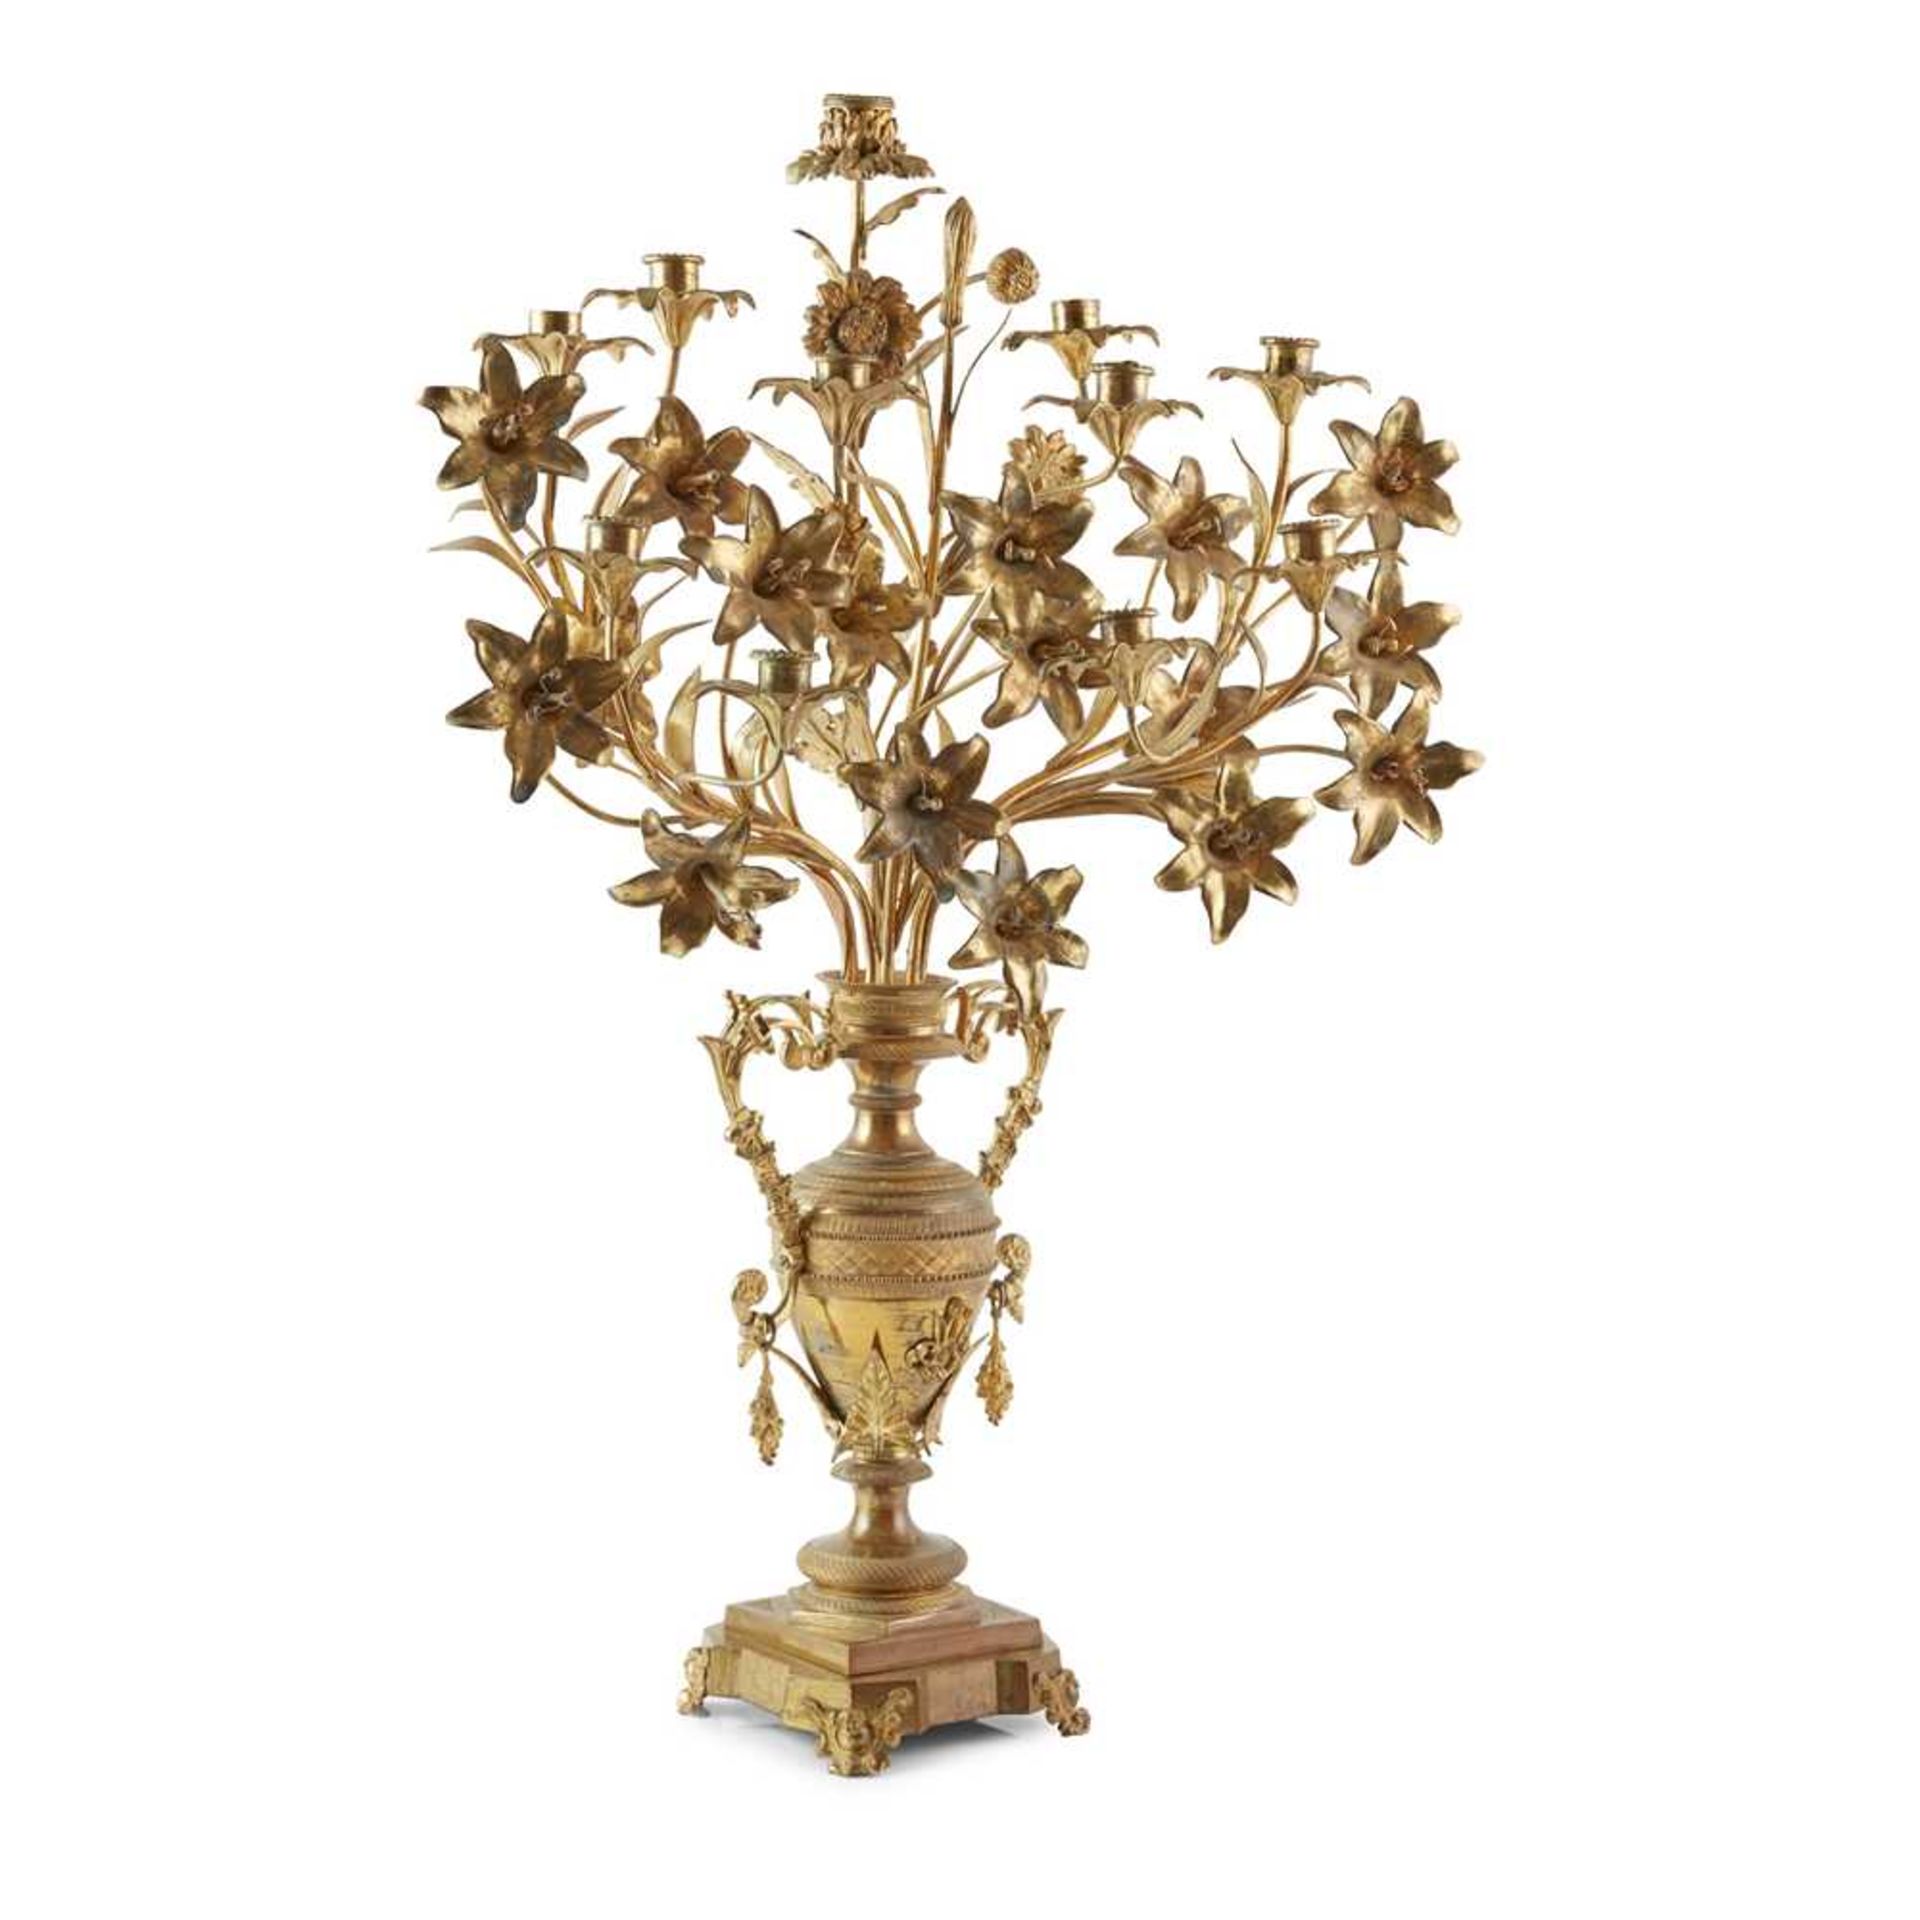 PAIR OF FRENCH LARGE GILT METAL CANDELABRA 19TH CENTURY - Image 3 of 3